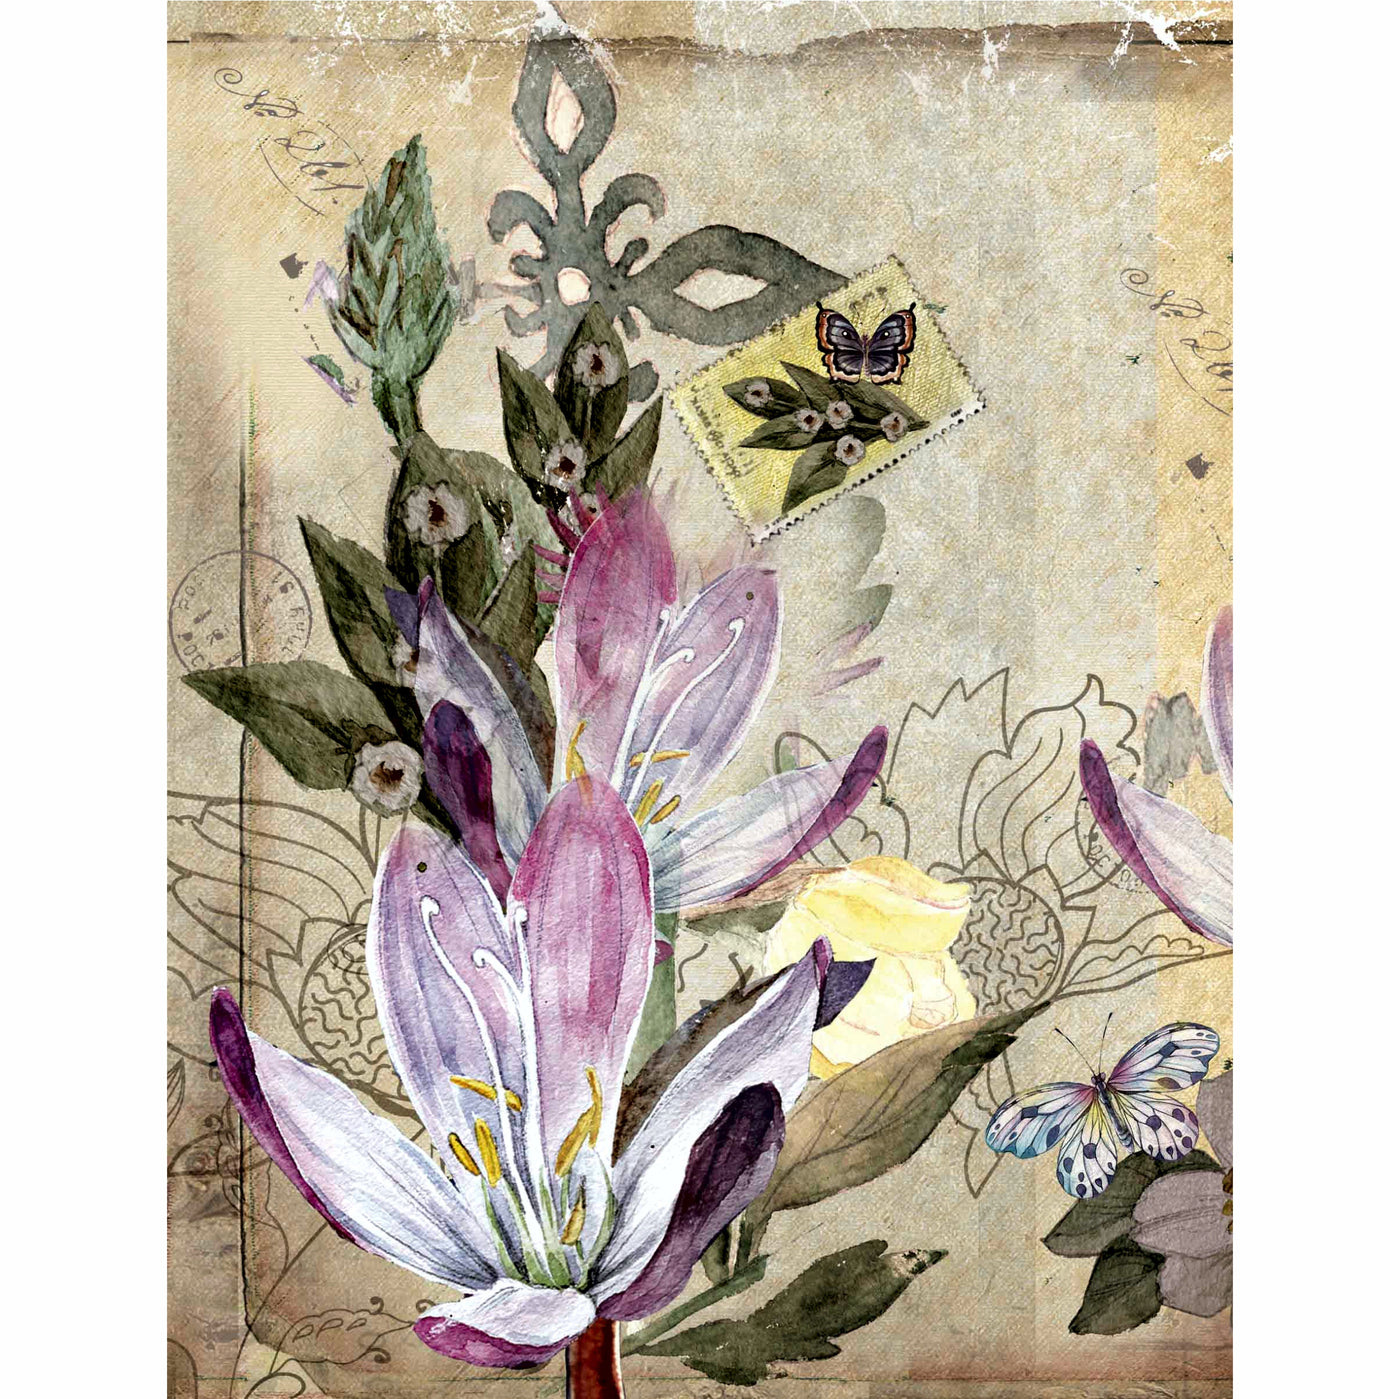 Floral Postcard Rice Paper- 6 x Different Printed Mulberry Paper Images 30gsm